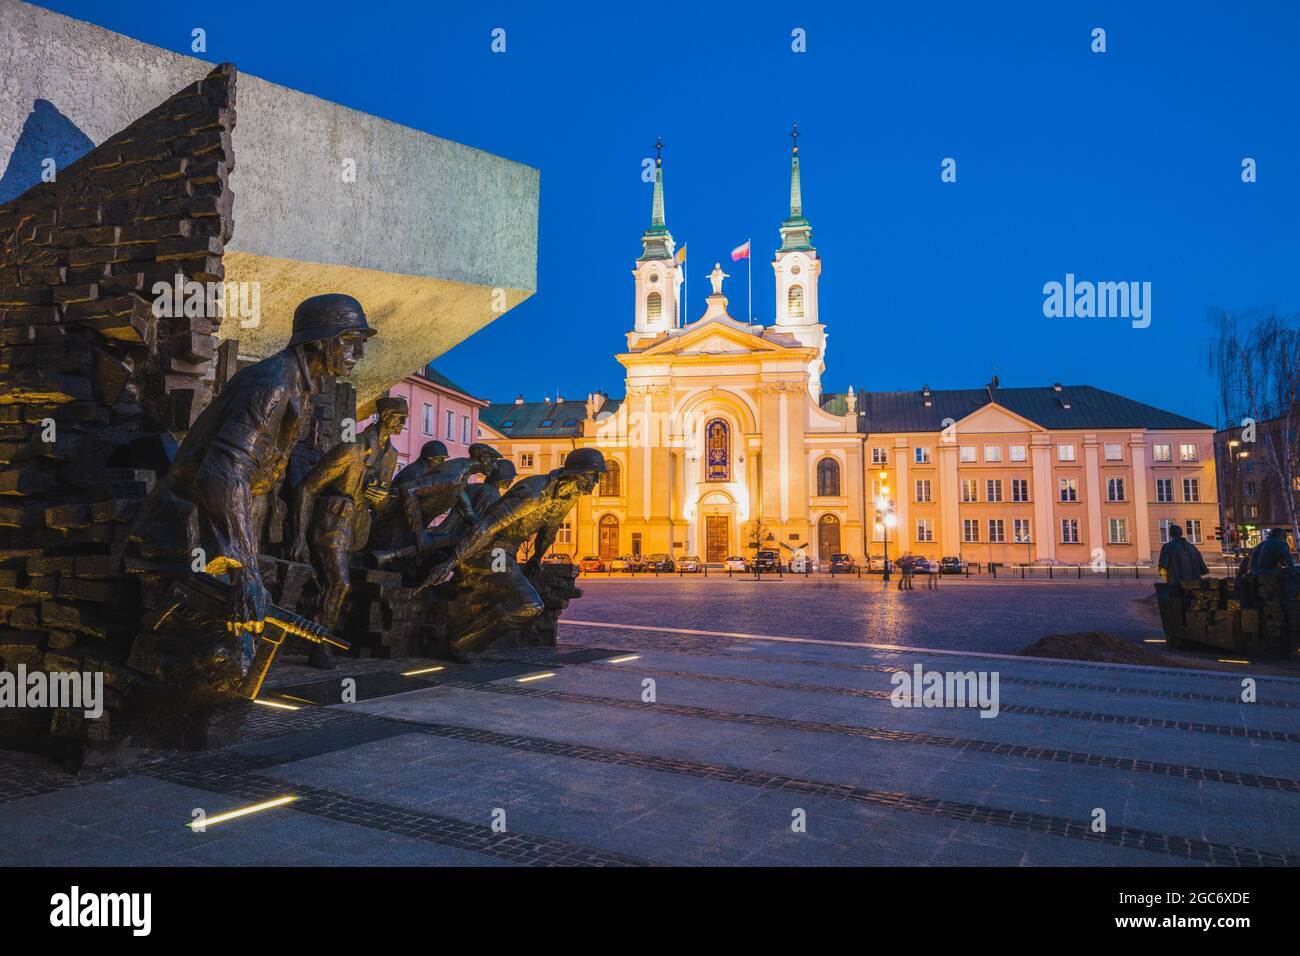 Poland, Masovia, Warsaw, Town square with World War II monument and illuminated cathedral Stock Photo